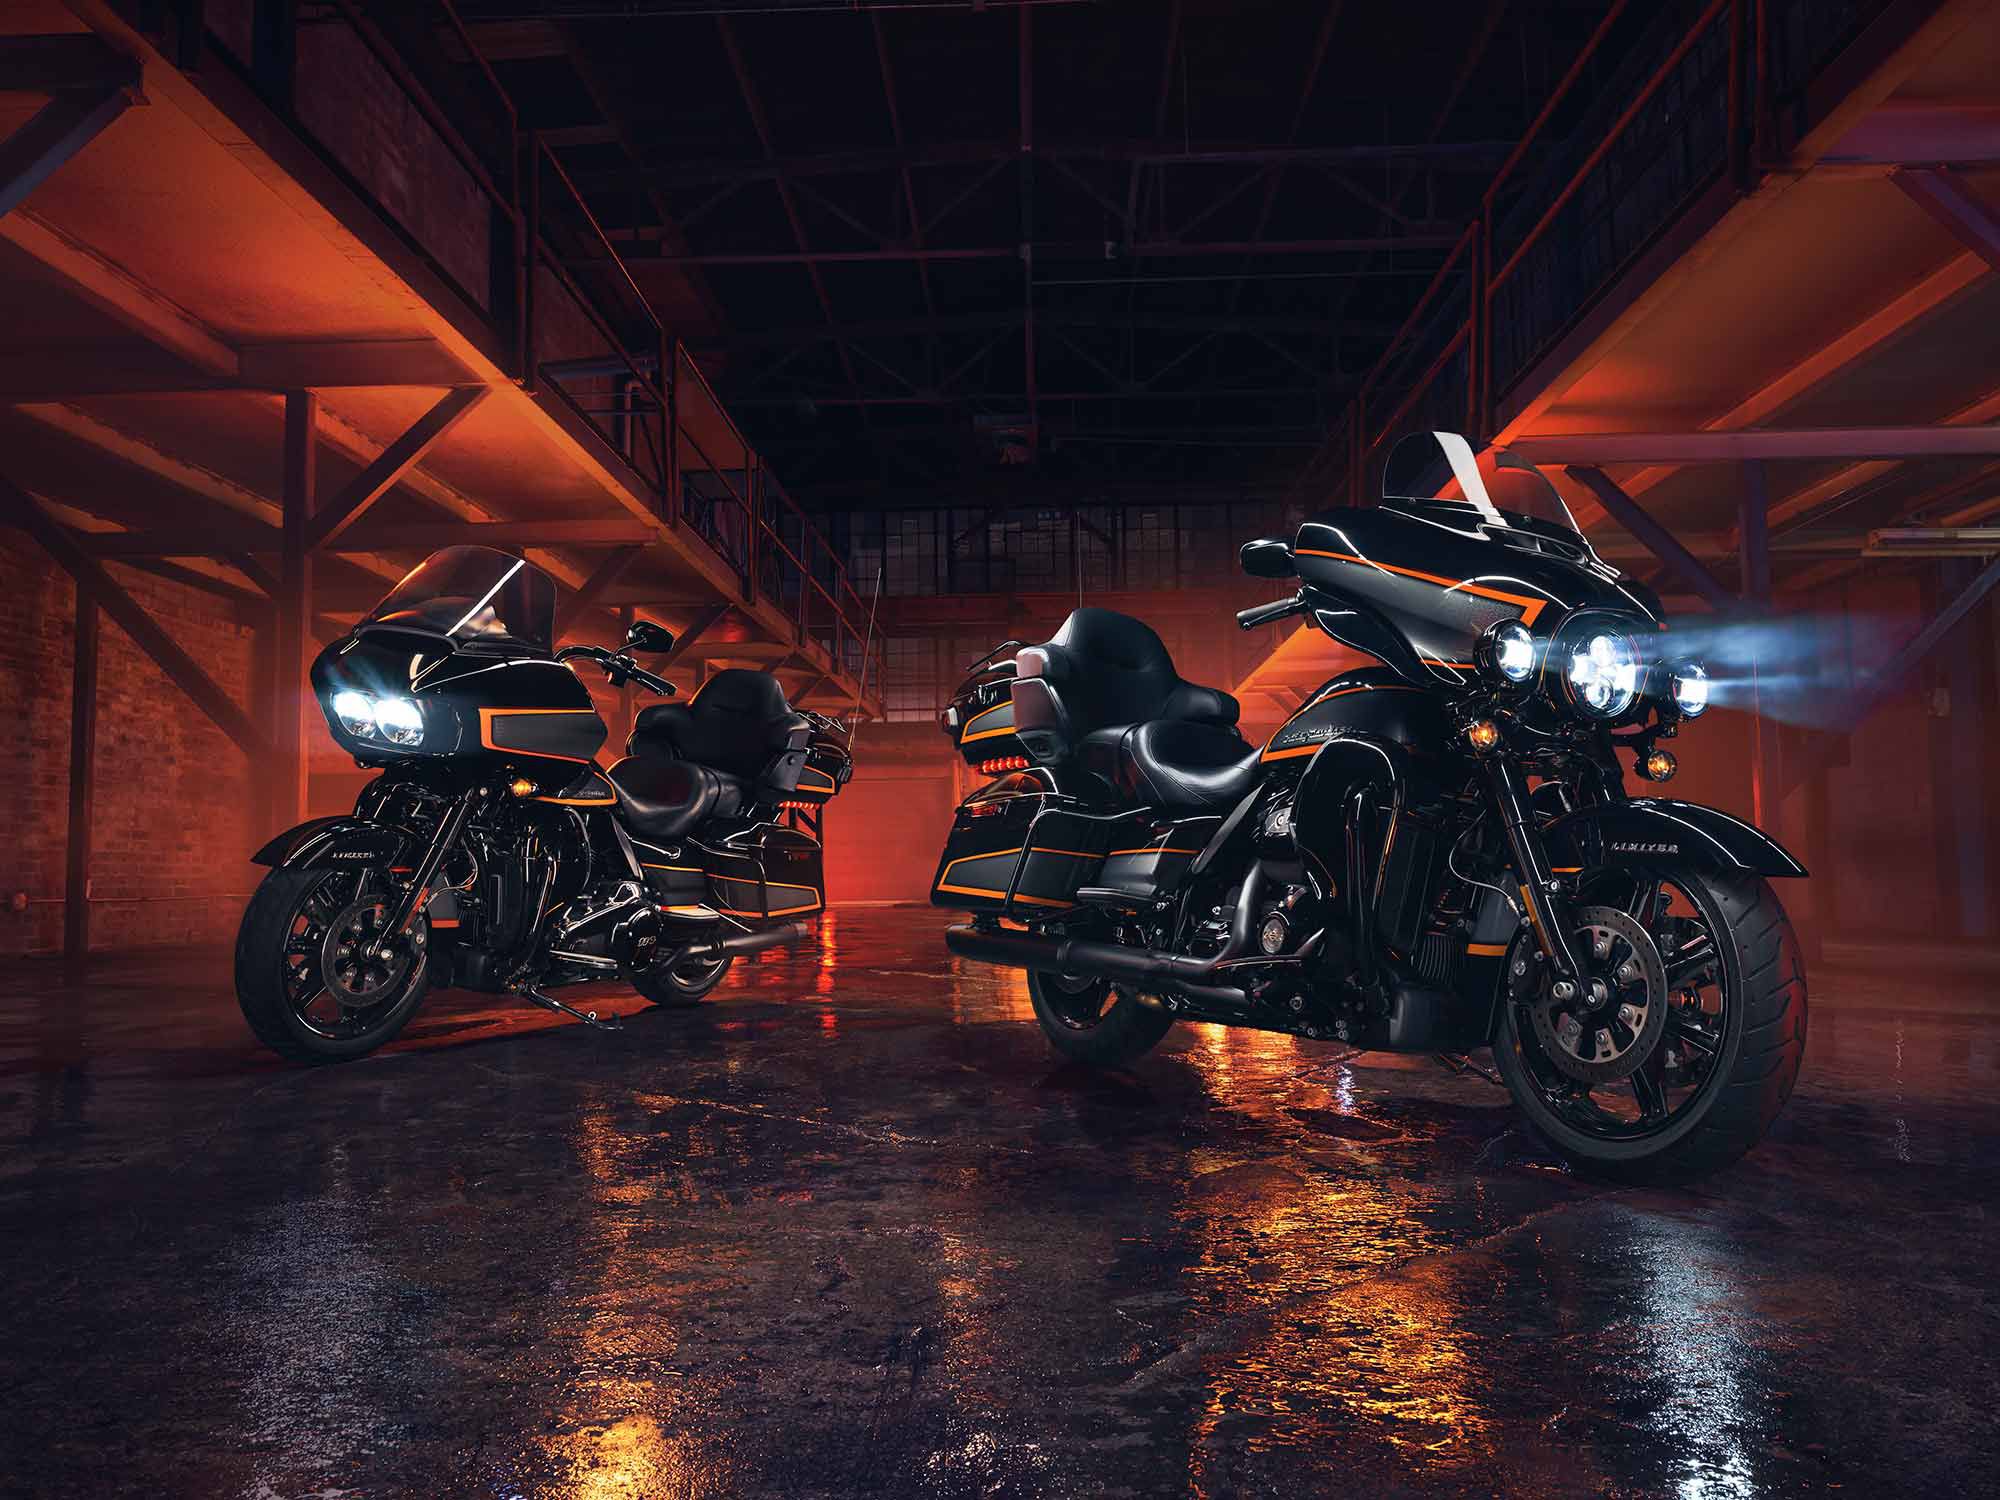 New Apex factory custom paint inspired by Harley-Davidson’s racing heritage.